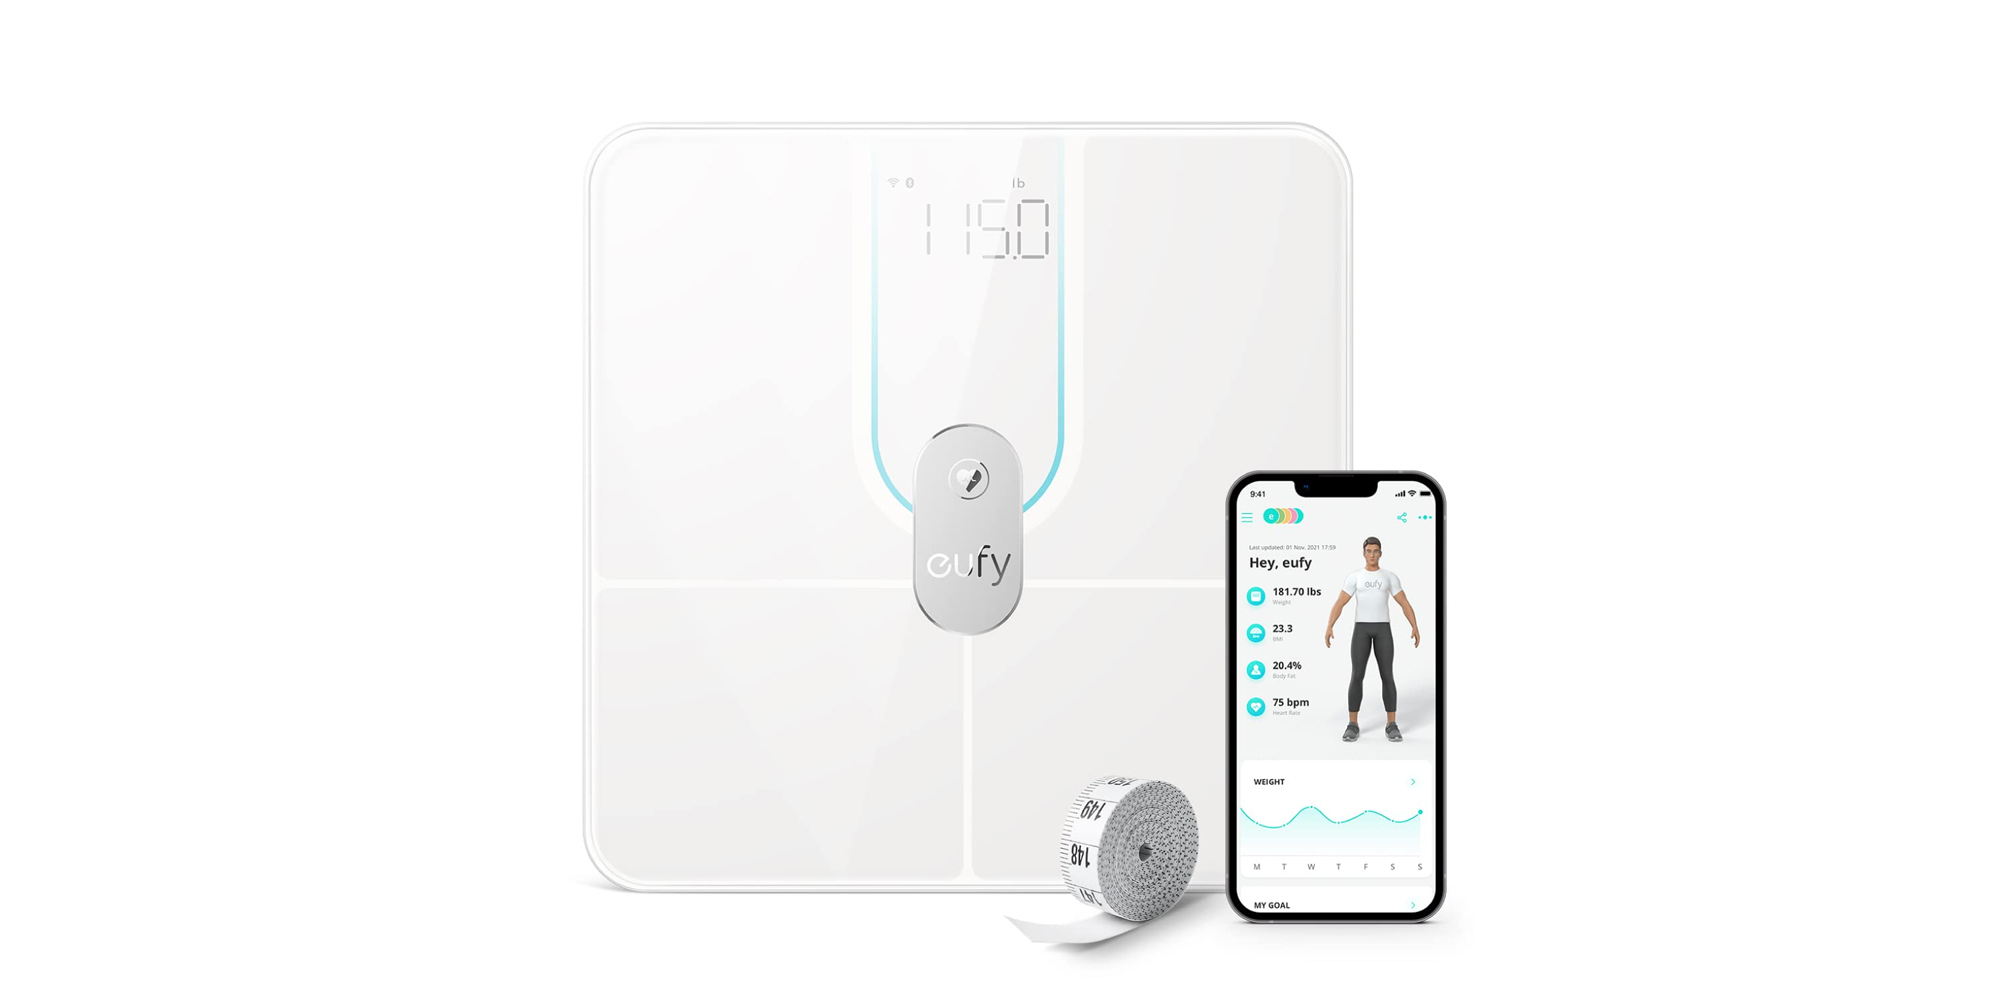 https://9to5toys.com/wp-content/uploads/sites/5/2022/08/Anker-eufy-Smart-Scale-P2-Pro-White-Colorway.jpg